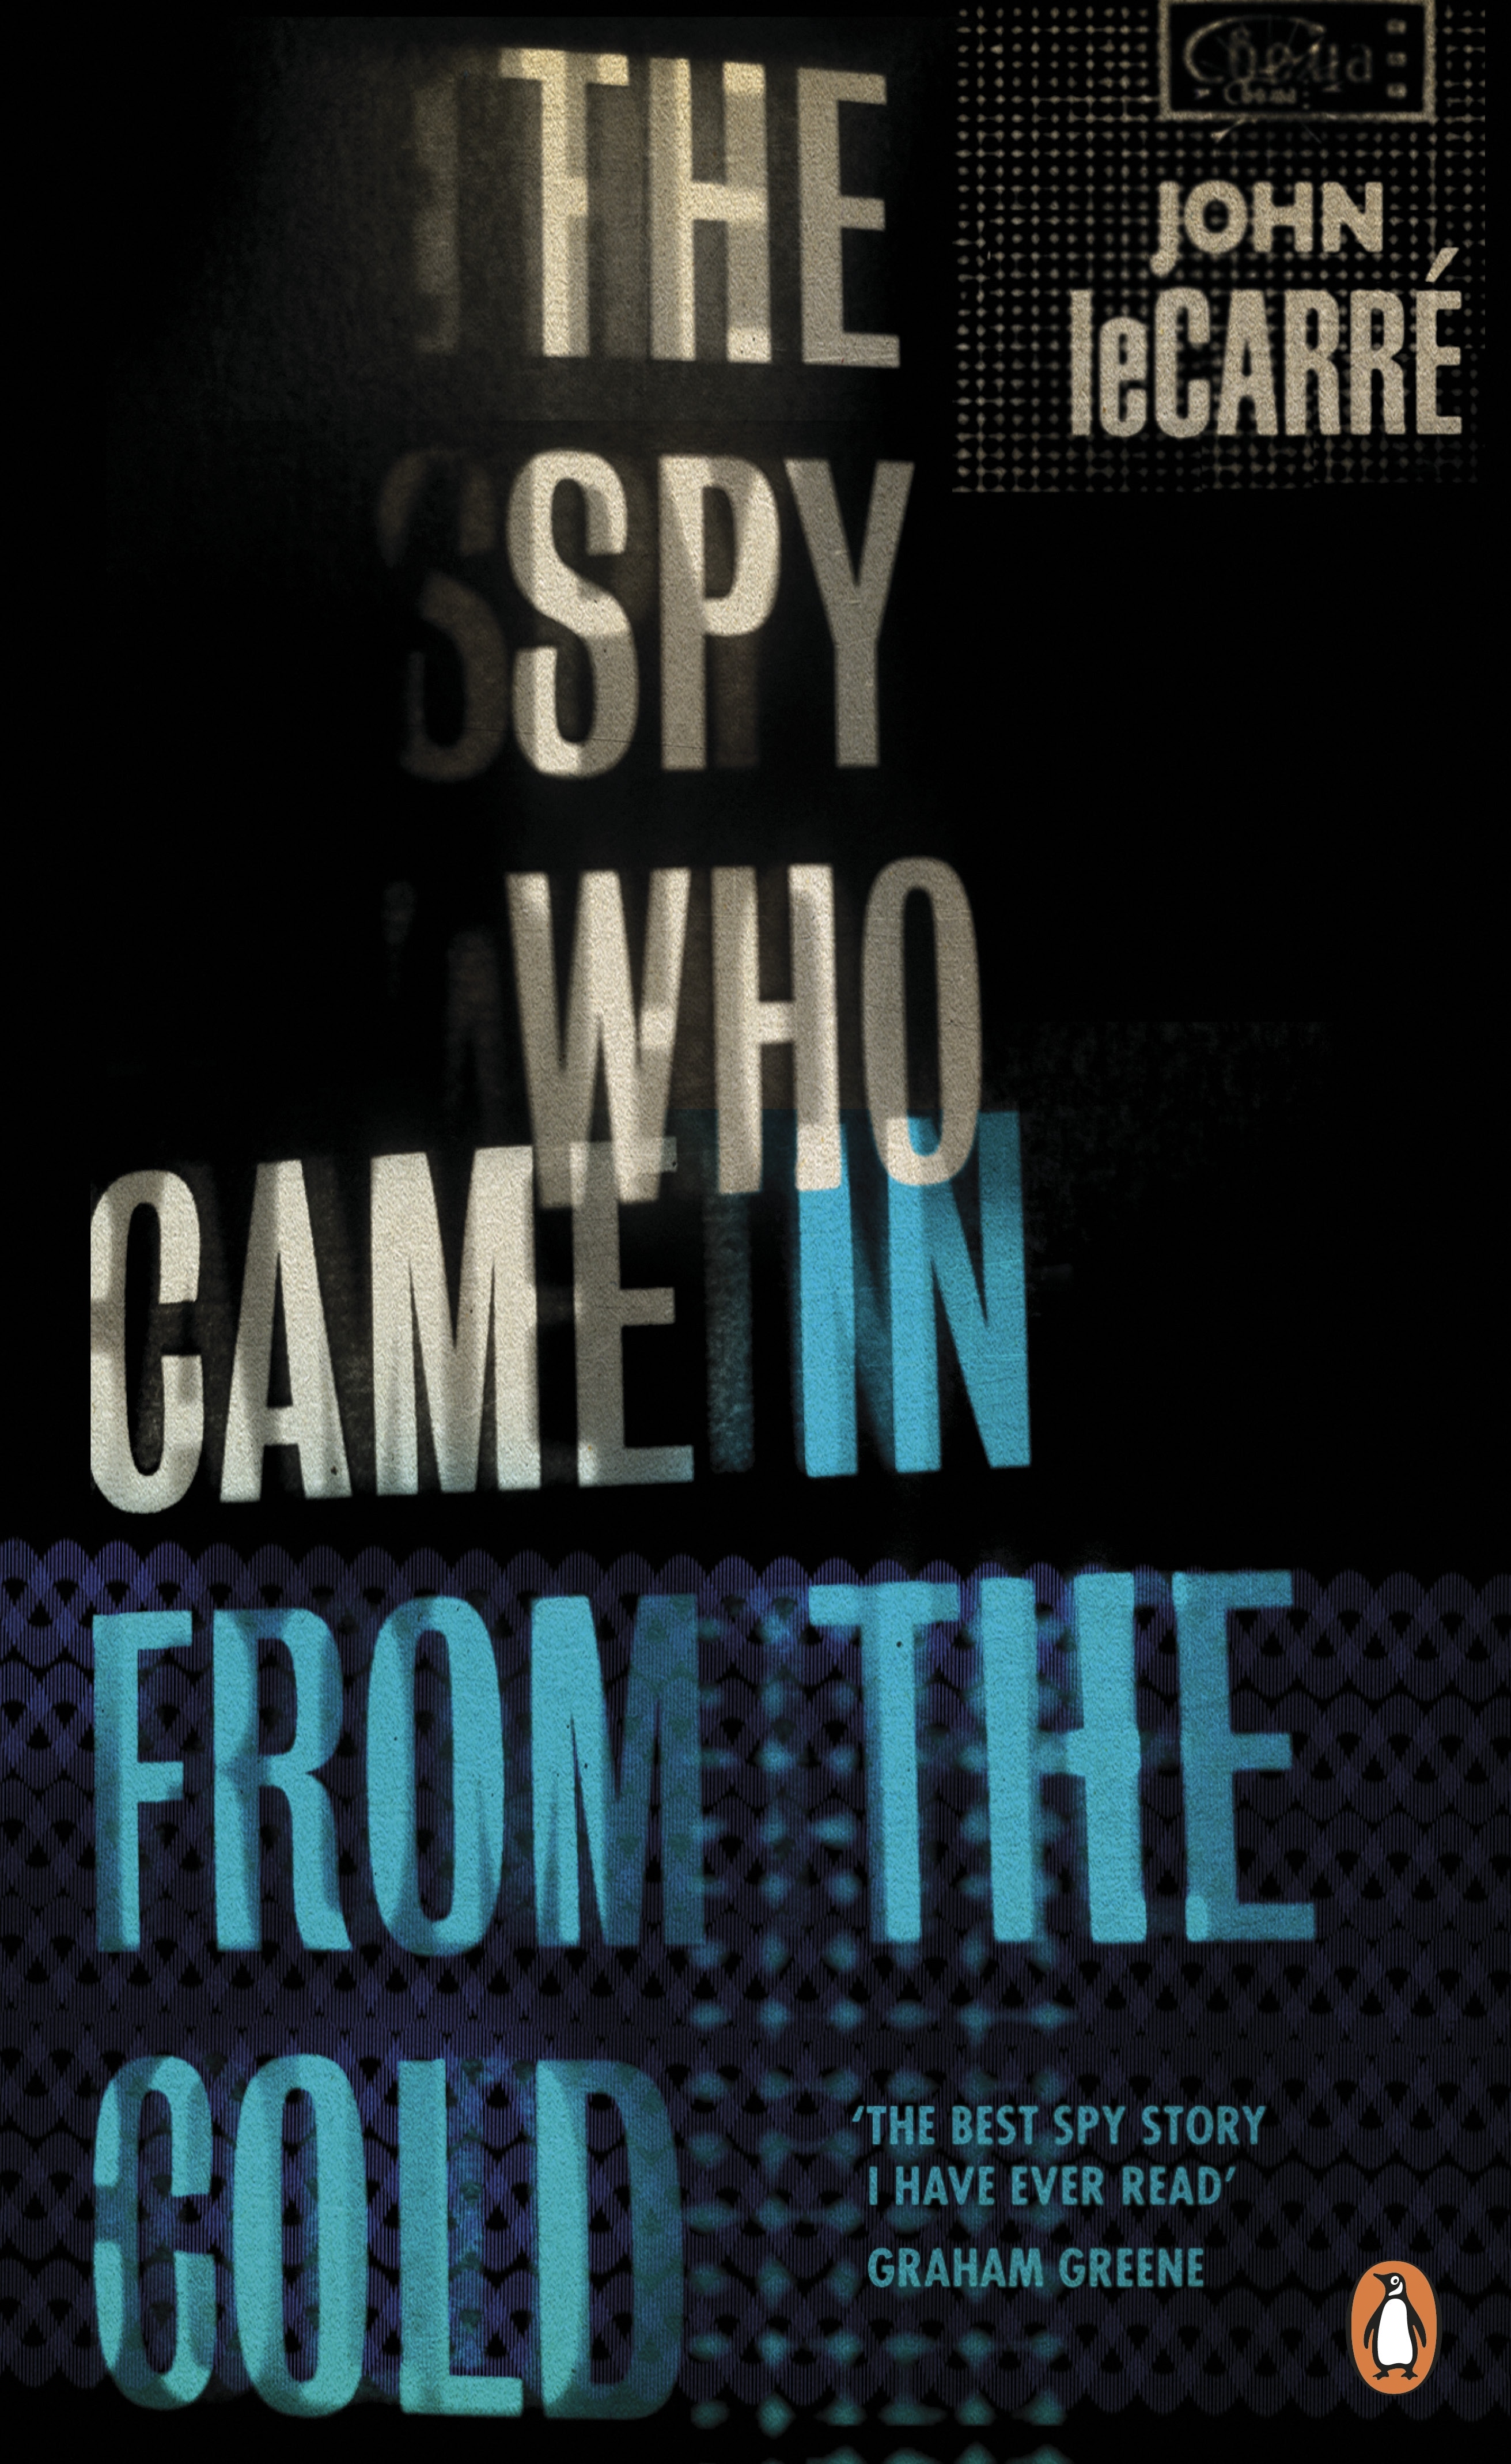 Book “The Spy Who Came in from the Cold” by John le Carré — August 4, 2016